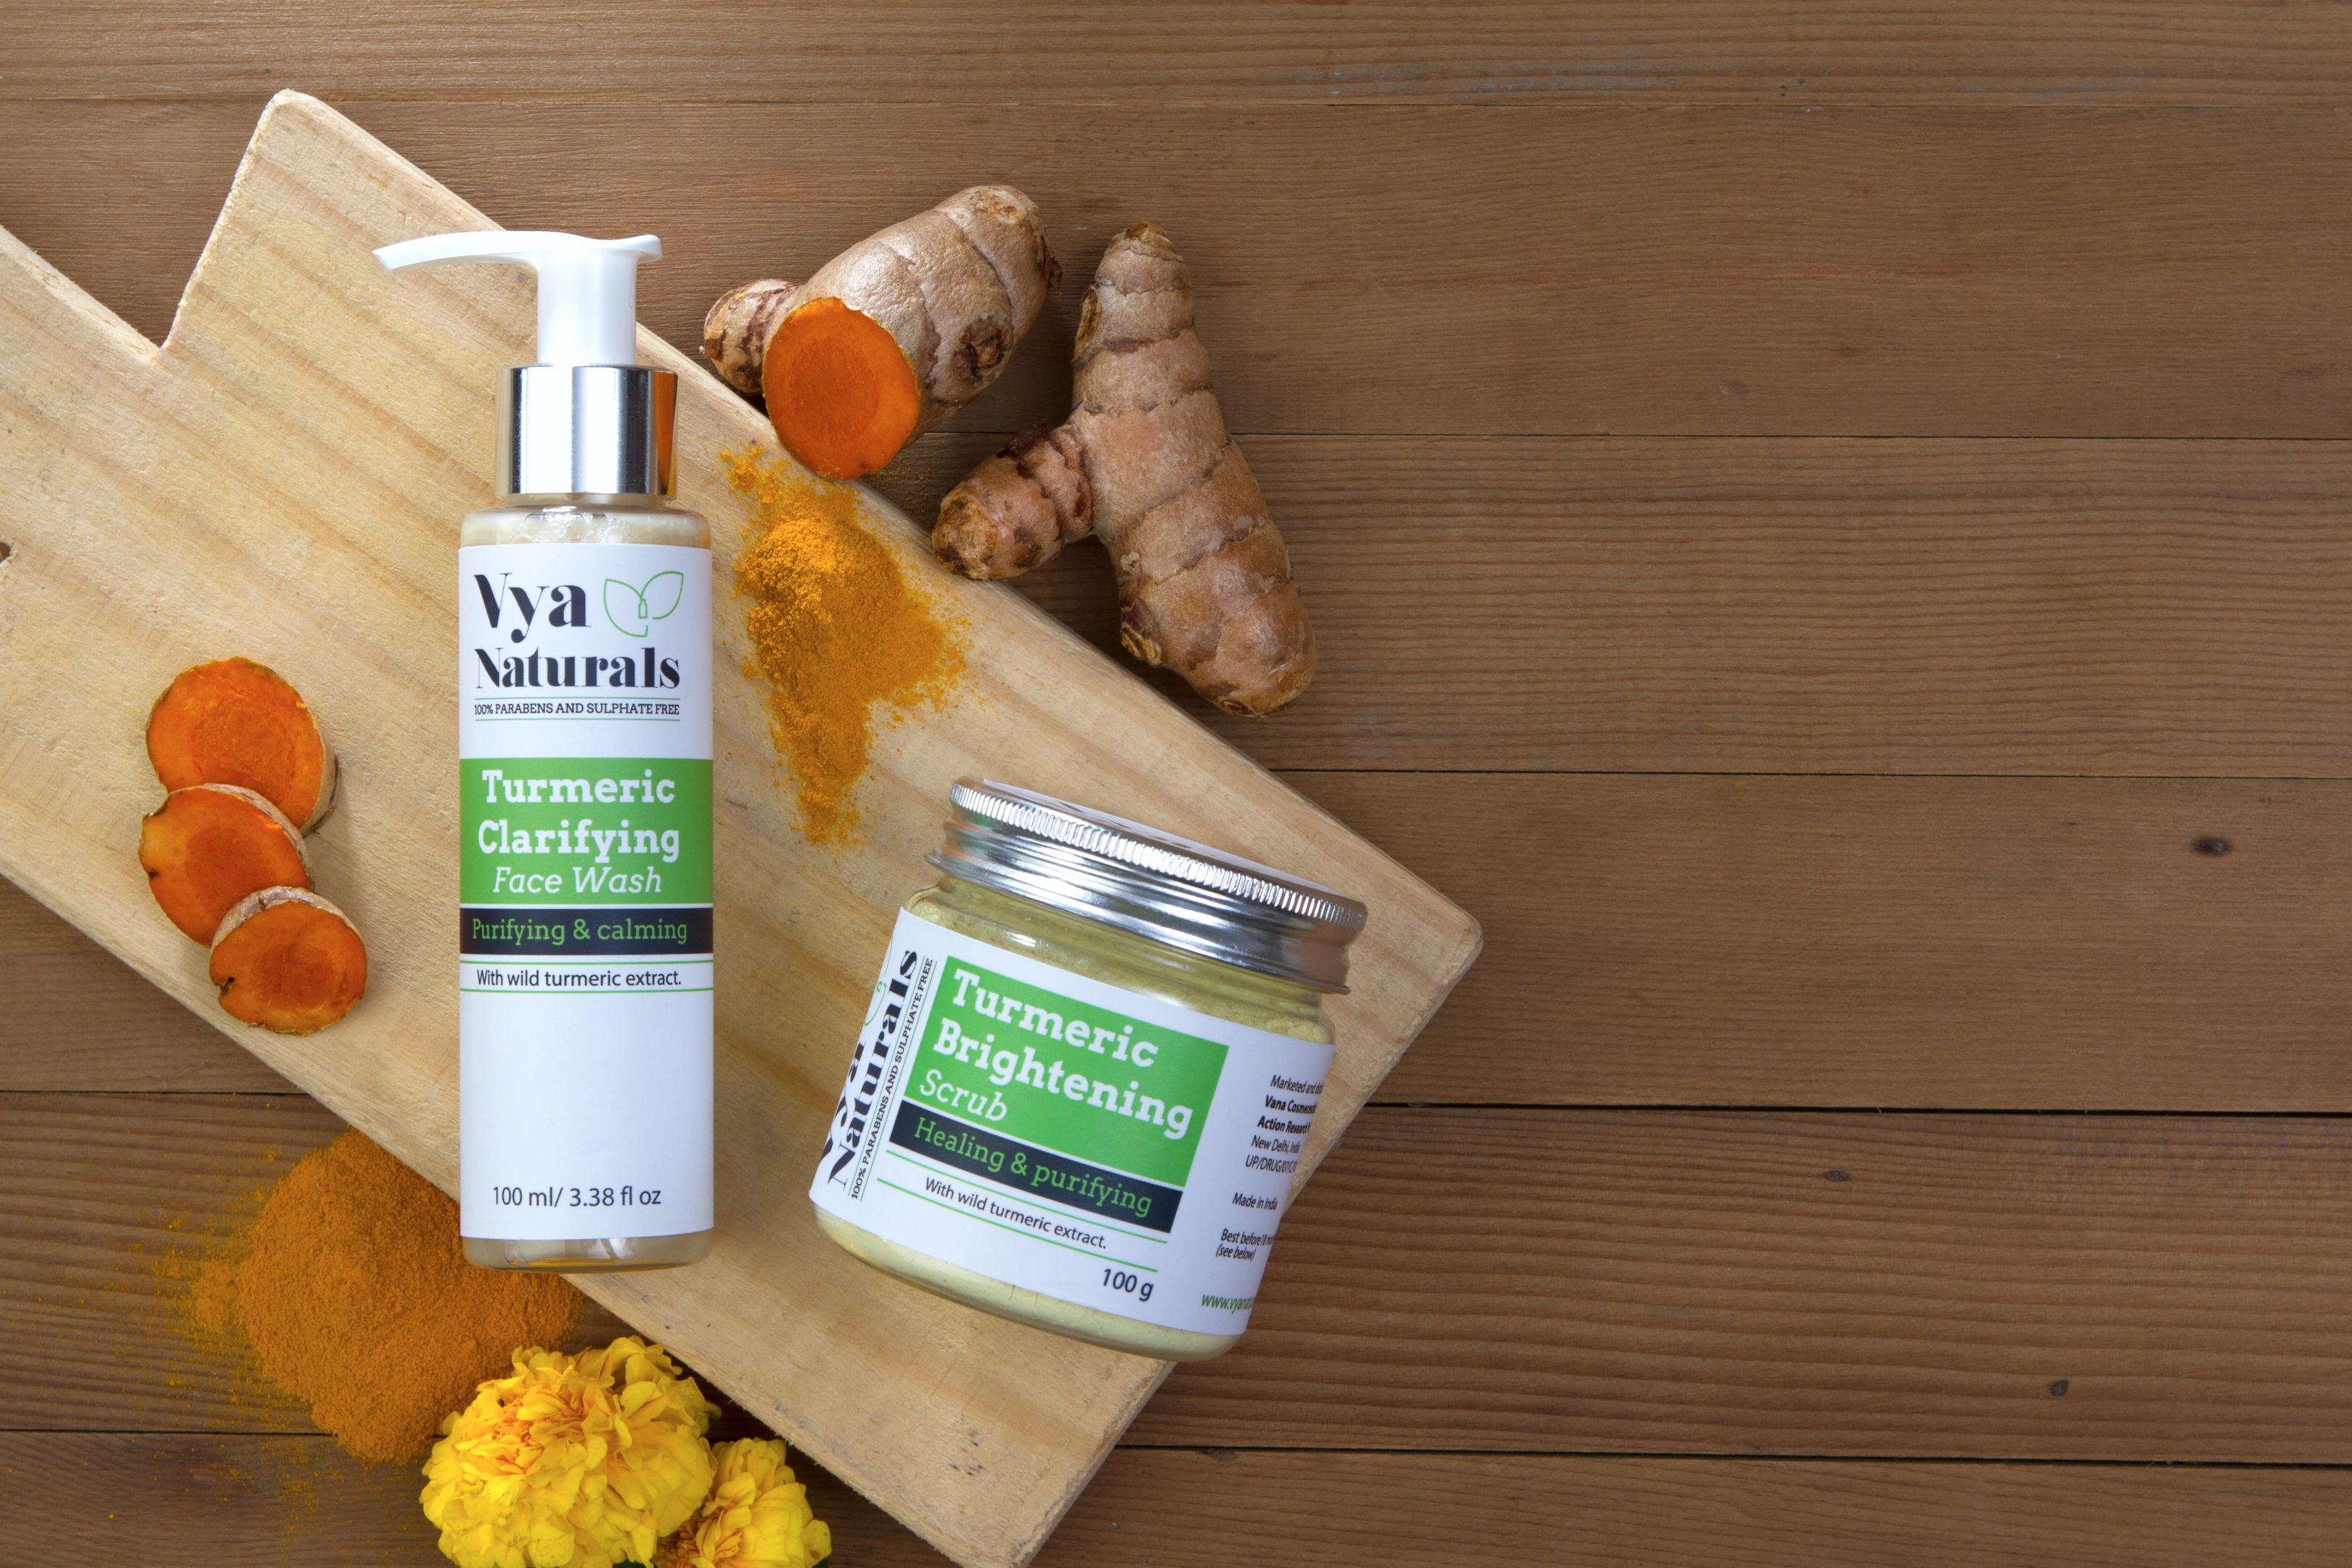 Vegan and Cruelty-Free Products Contain Natural Ingredients